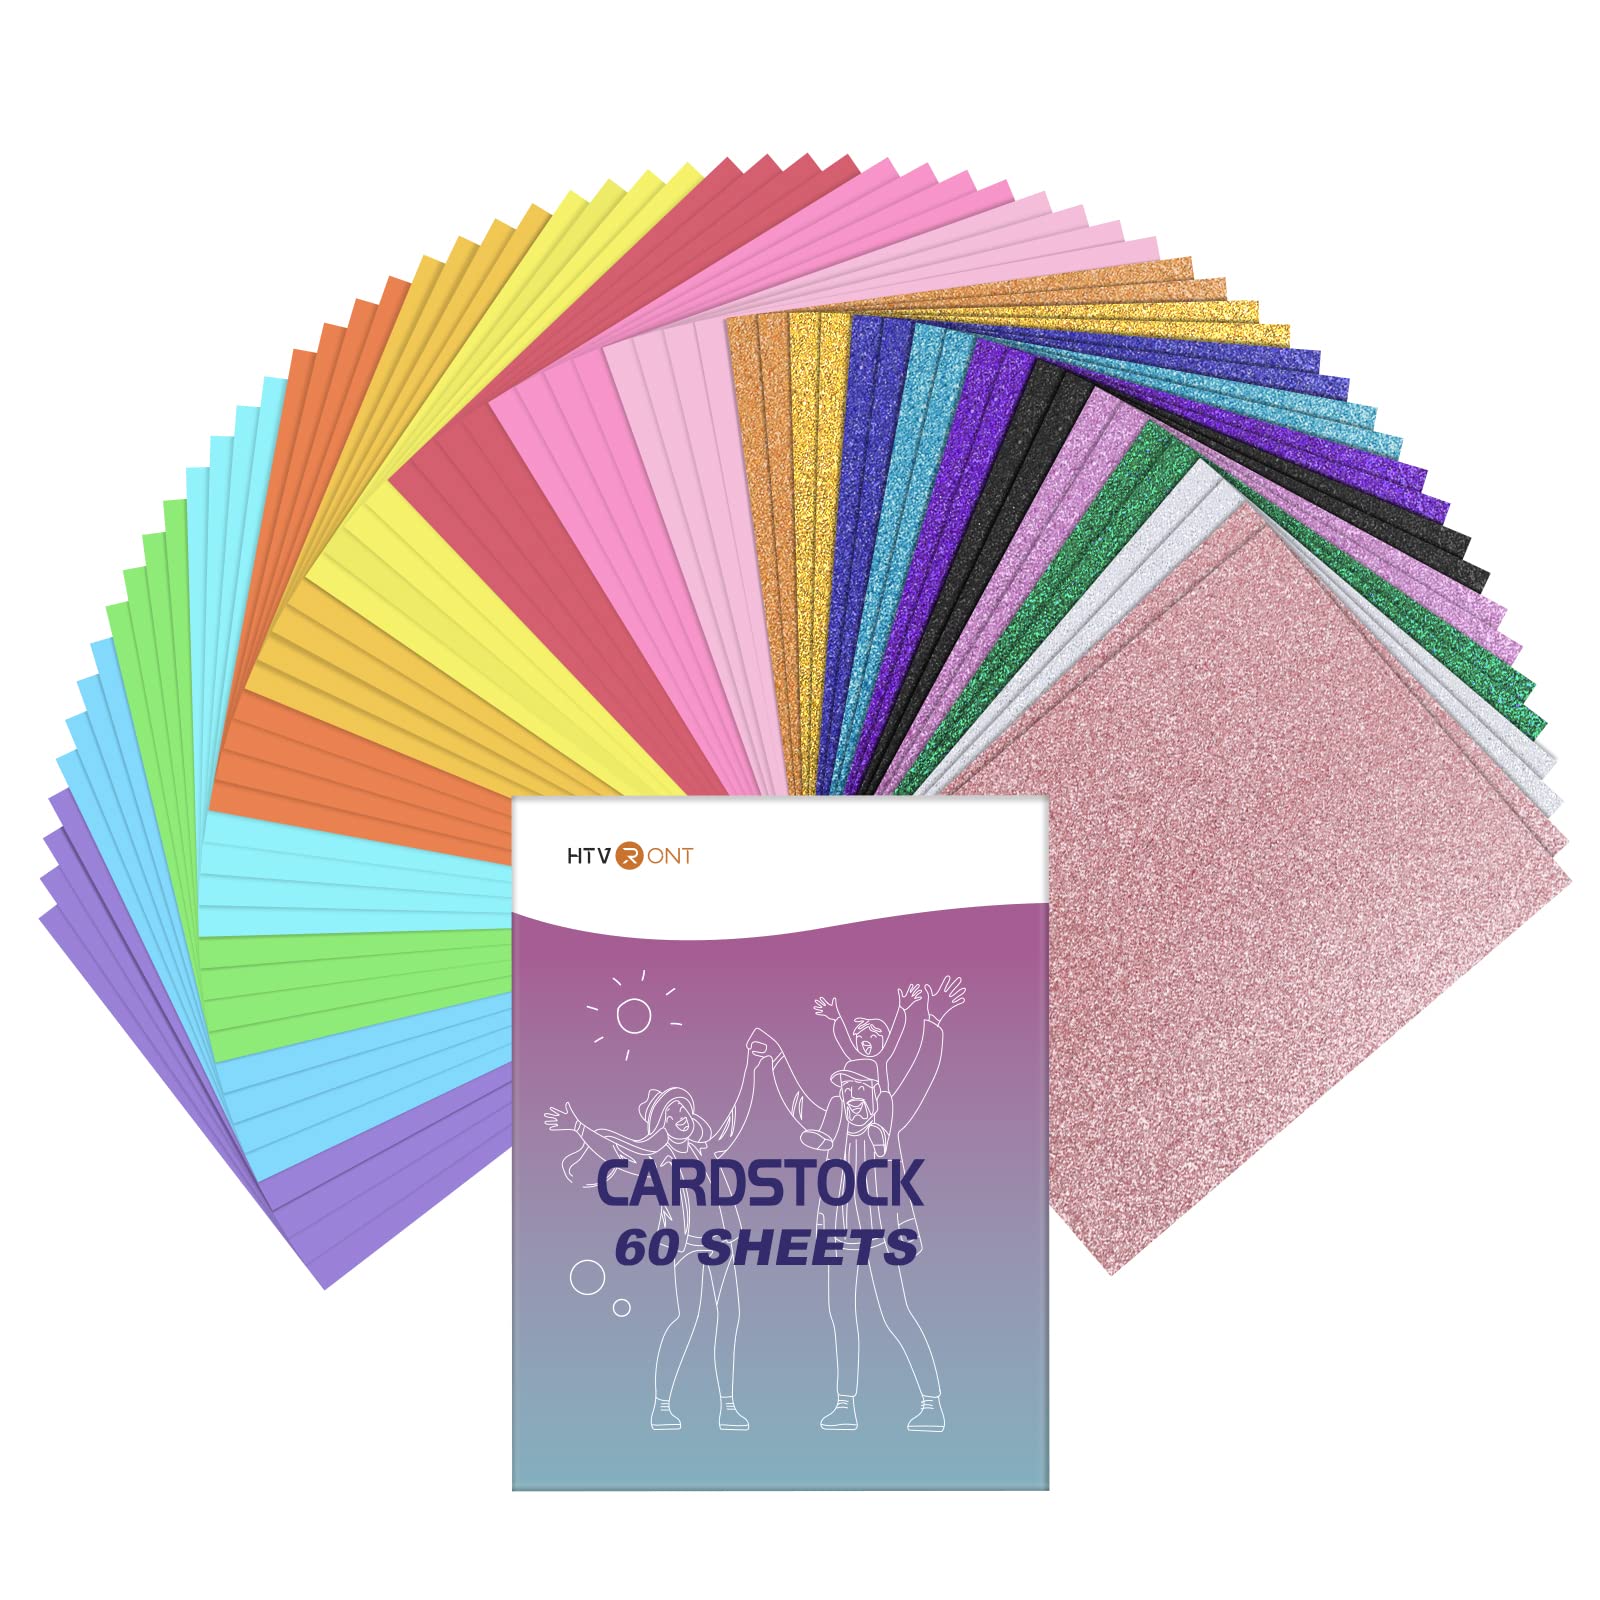 Wholesale CRASPIRE Colored Cardstock 10 Colors 20 Sheets